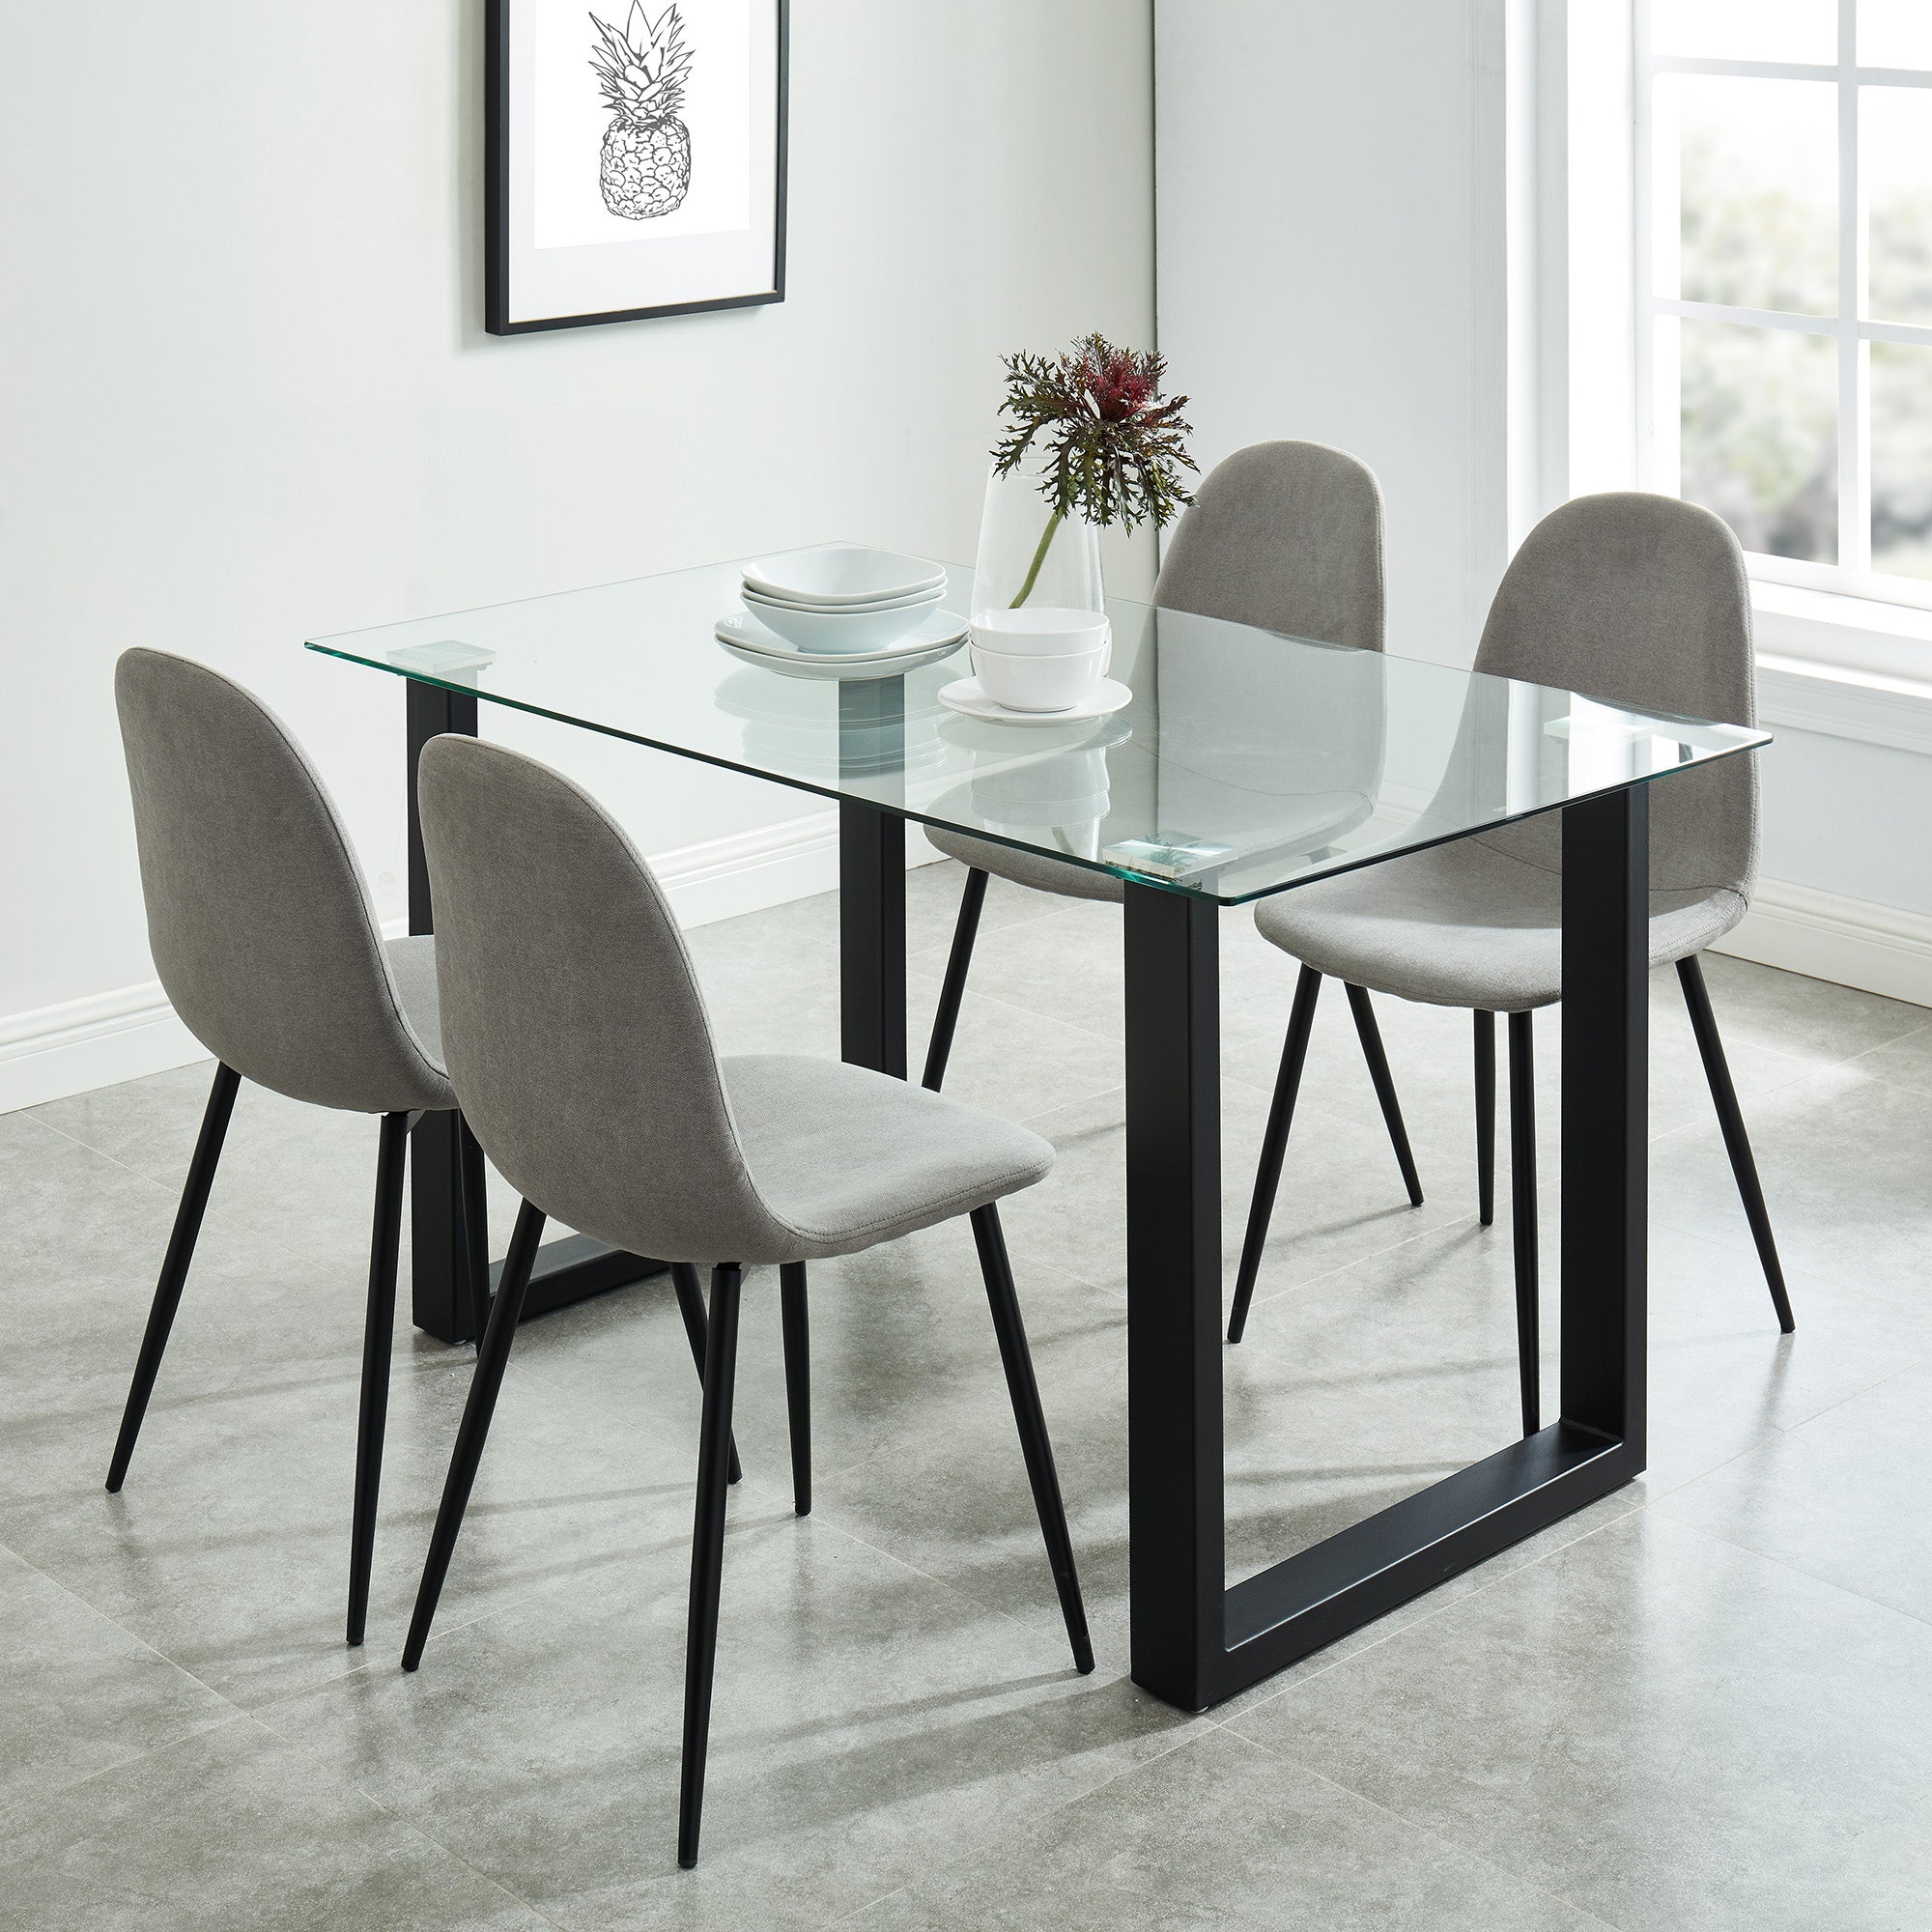 Franco/Olly 5pc Dining Set in Black with Grey Chair 207-454BK/606GY